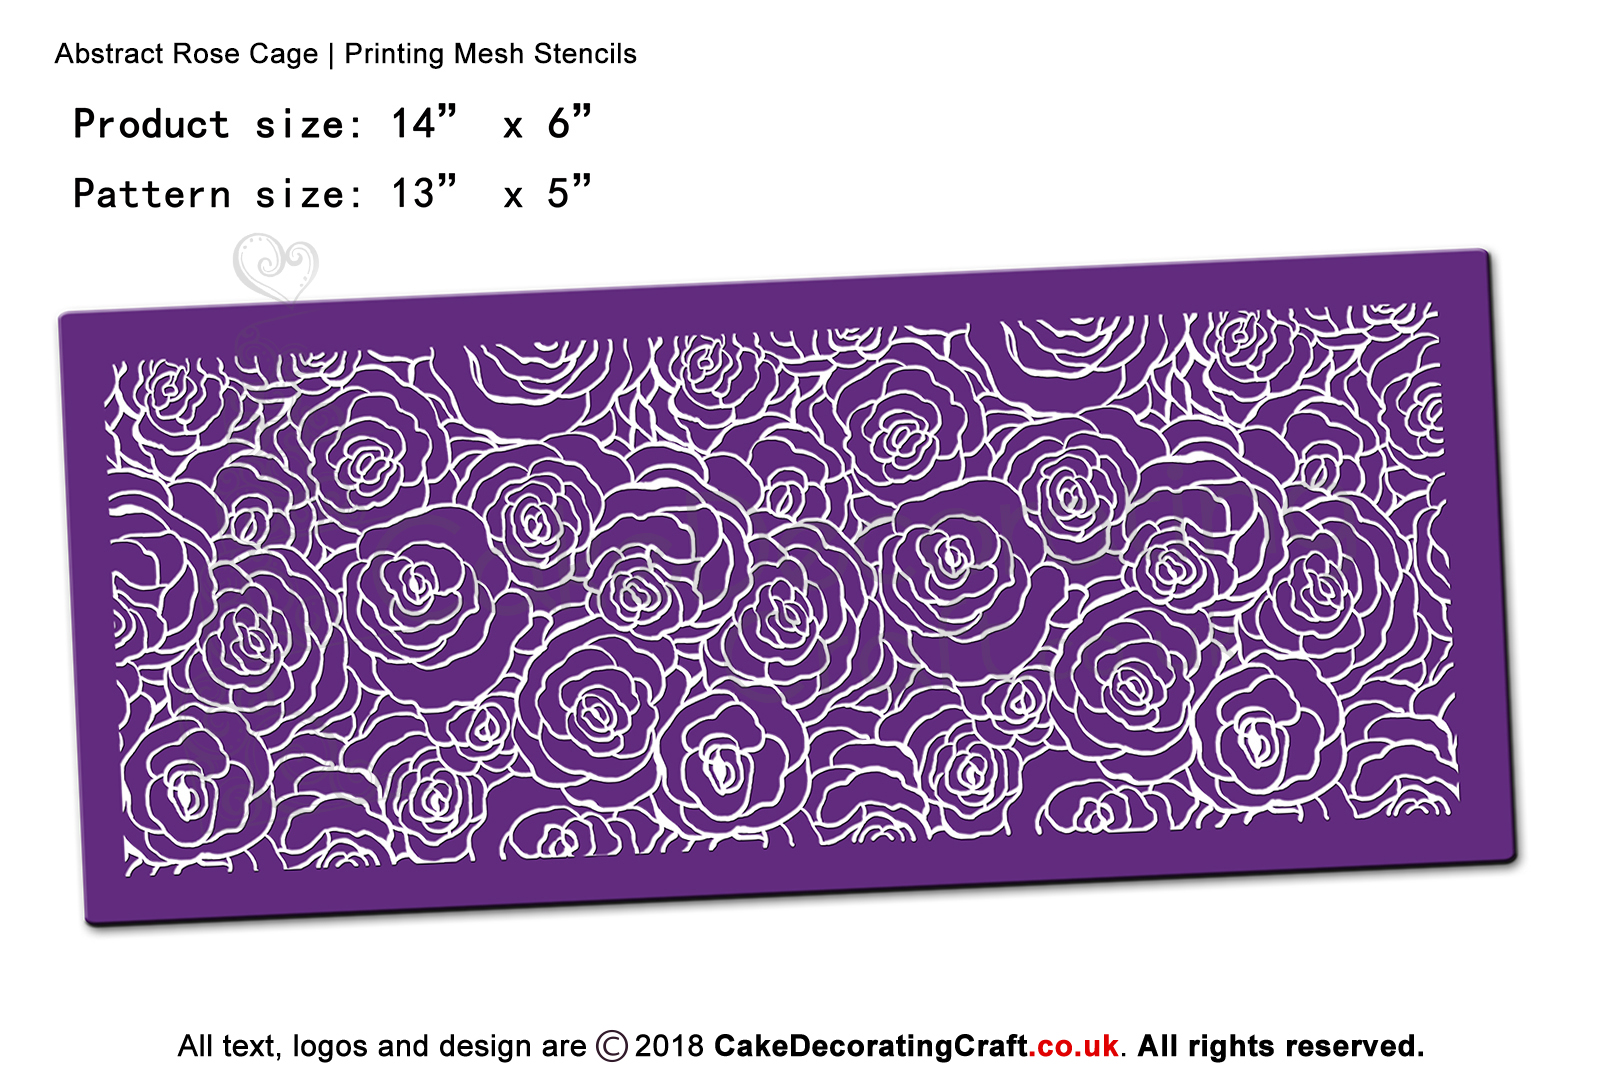 Abstract Rose Cage | Printing Mesh Stencils | Edible Ink